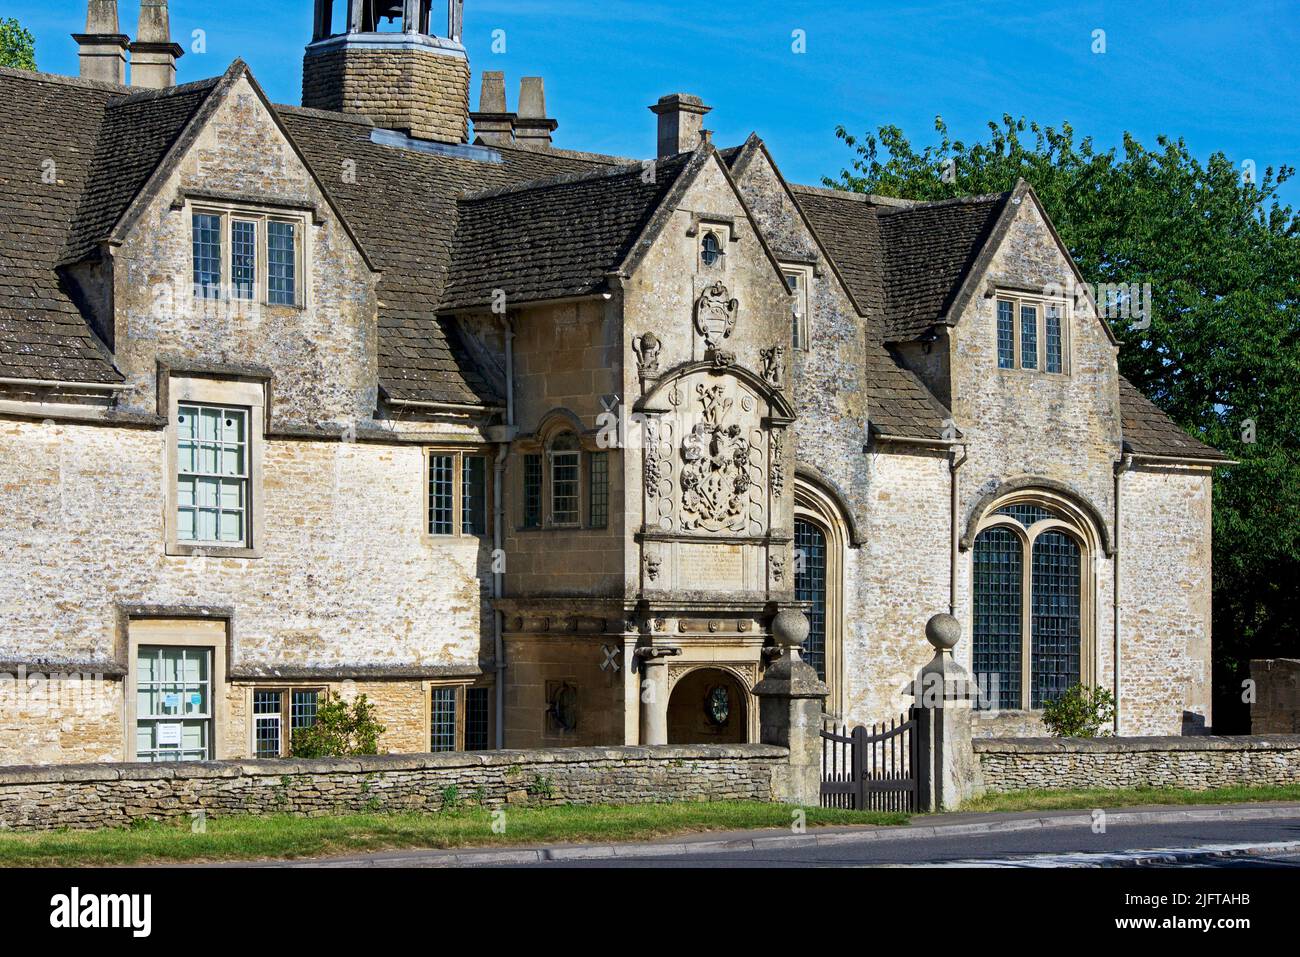 17th secolo Hungerford Almshouses a Corsham, Wiltshire, Inghilterra Regno Unito Foto Stock